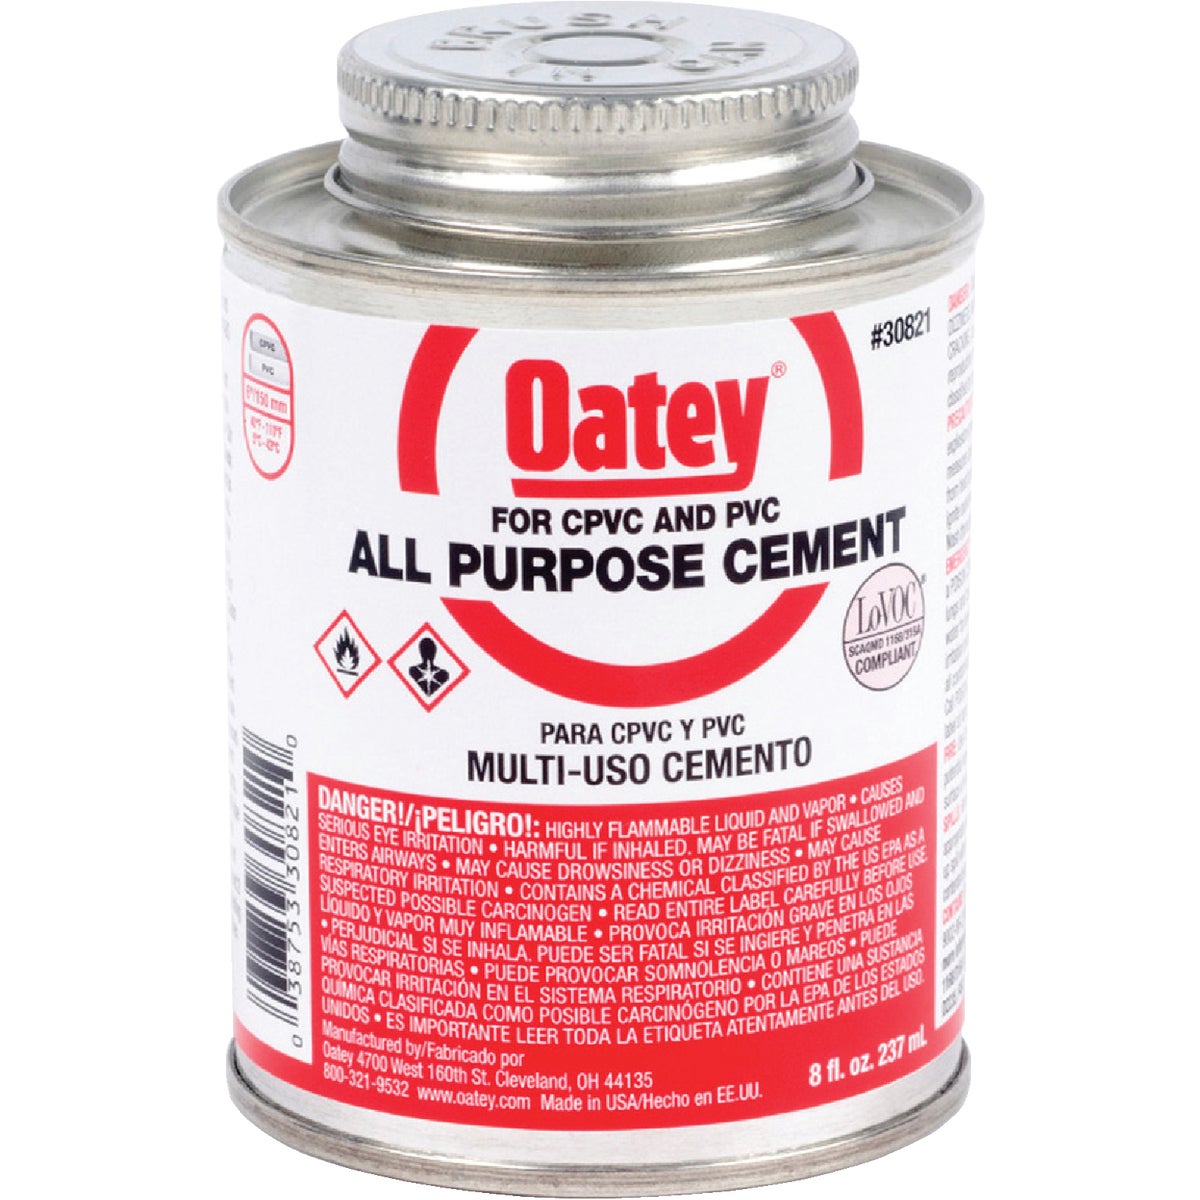 Oatey 8 Oz. Heavy Bodied Clear Multi Purpose Cement CPVC and PVC